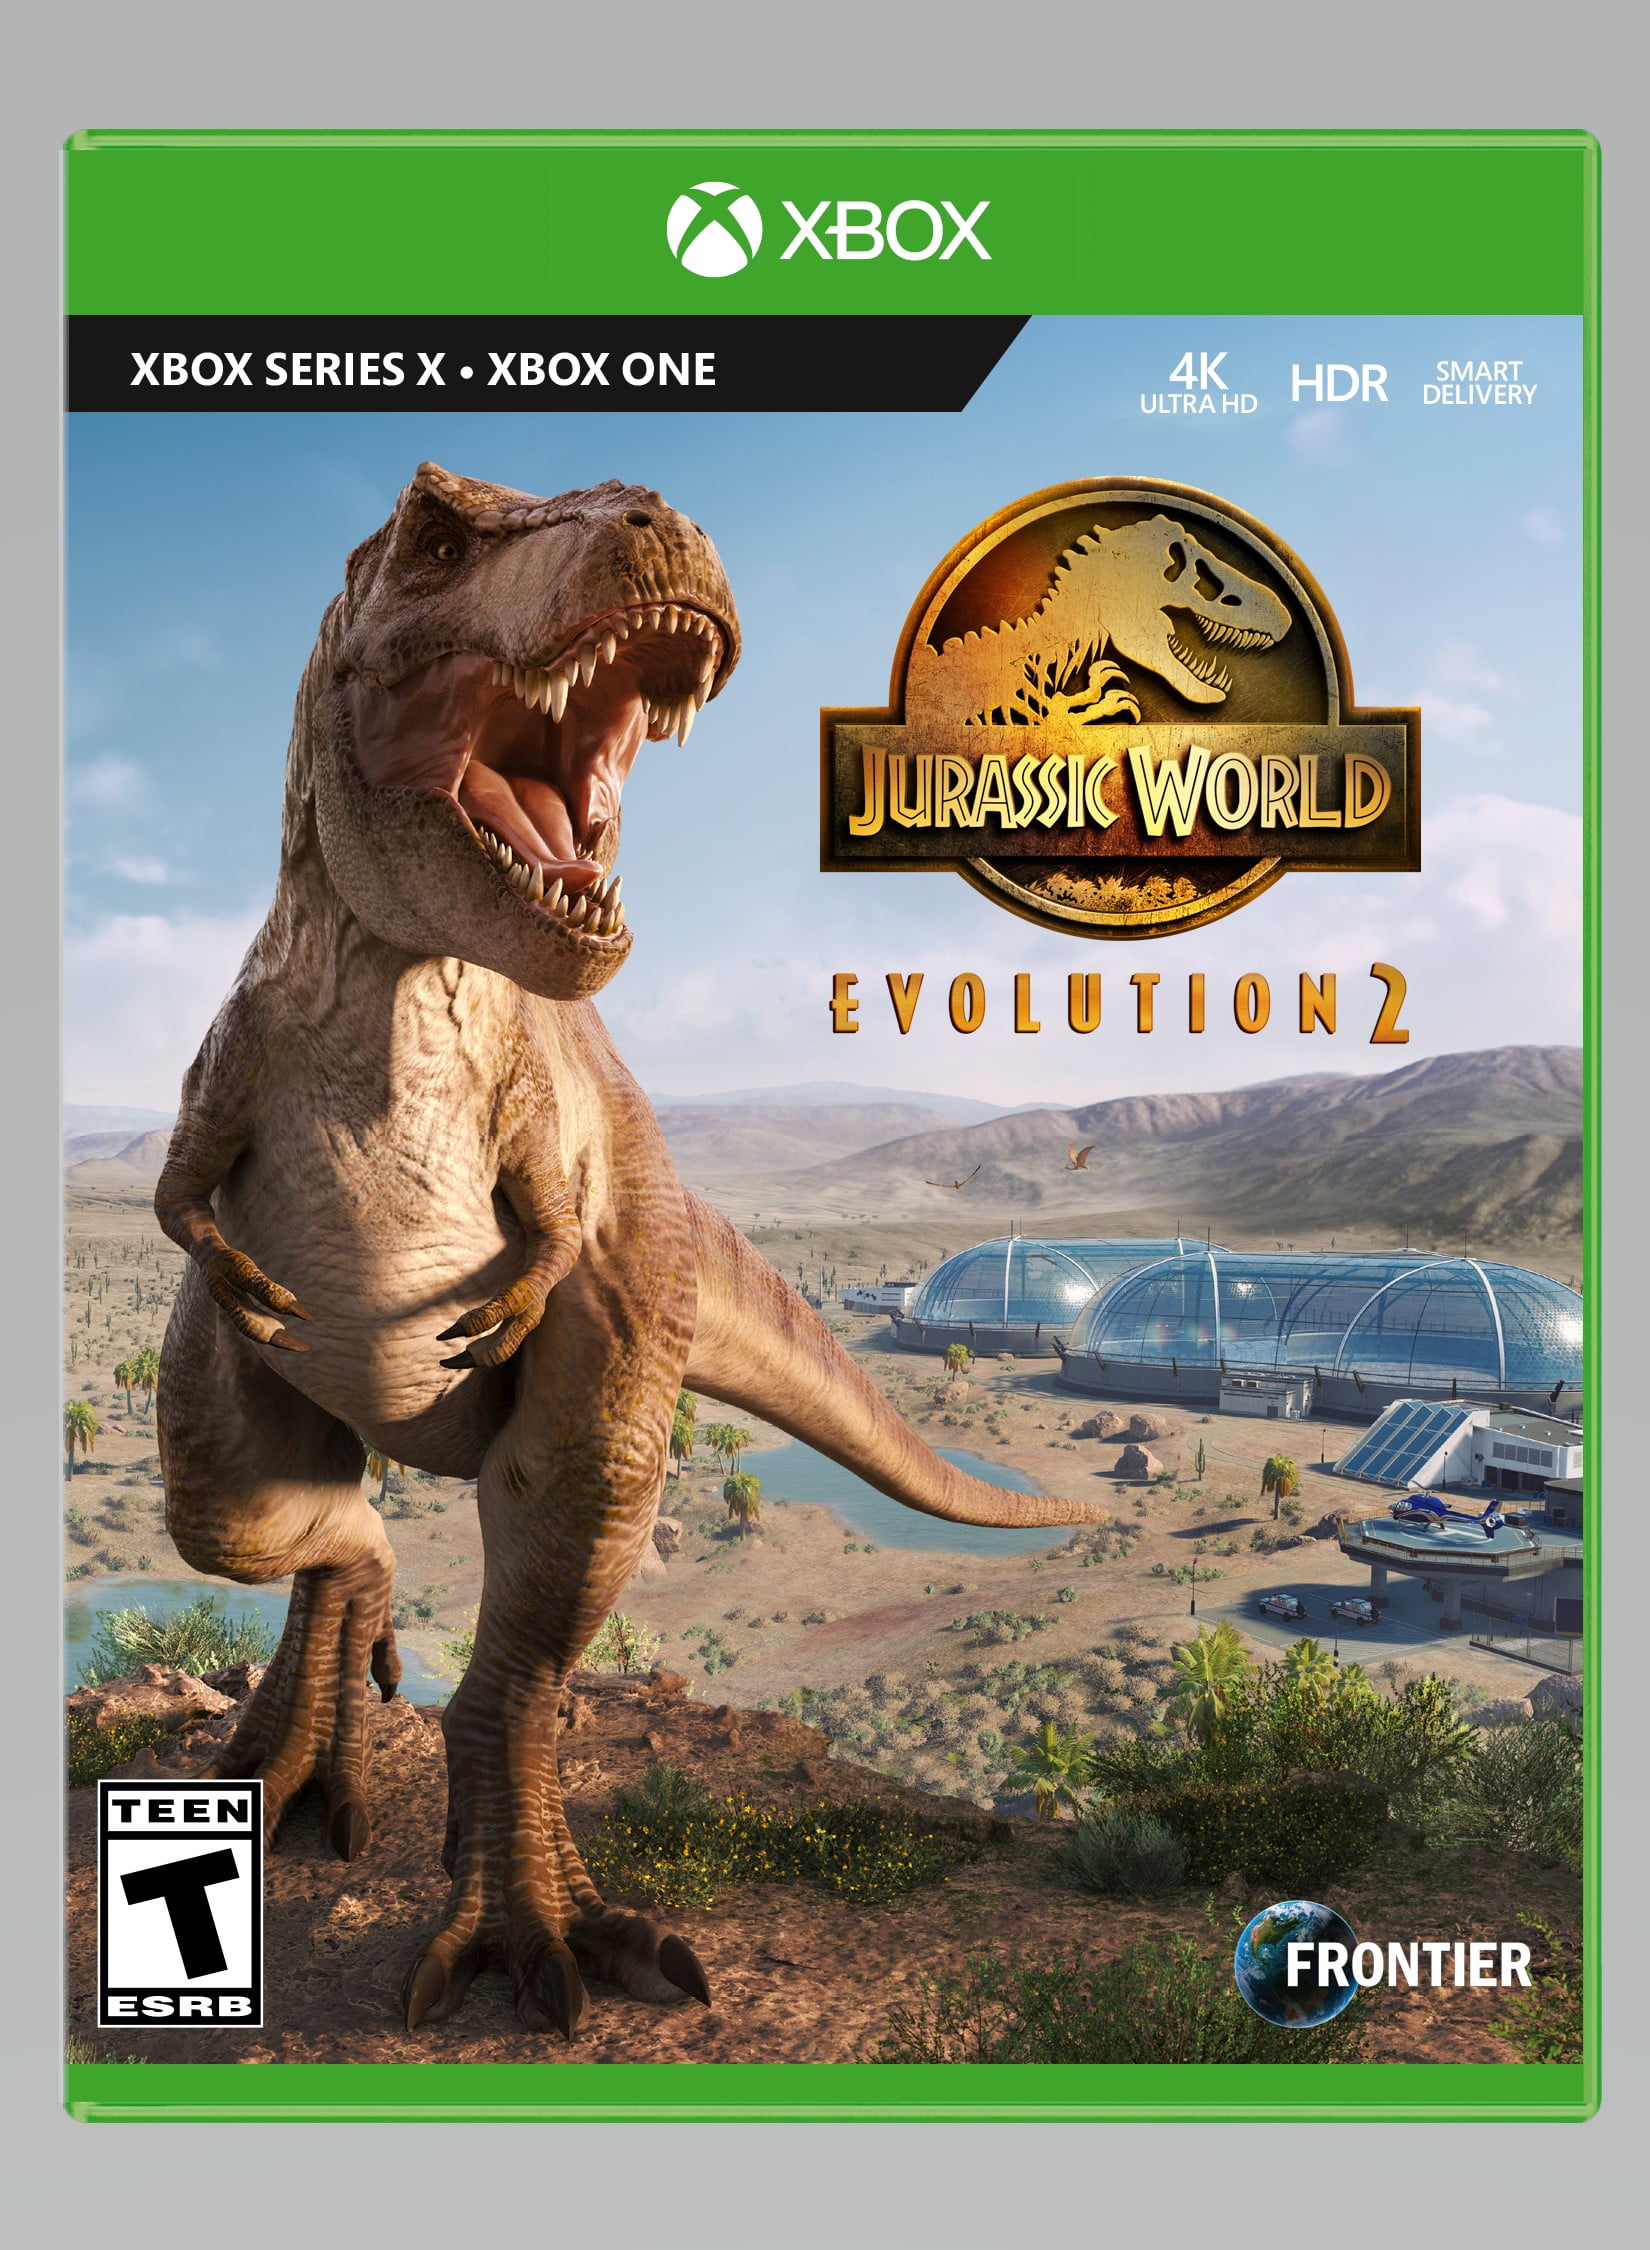 Coming Soon to Xbox Game Pass: Jurassic World Evolution 2, Sniper